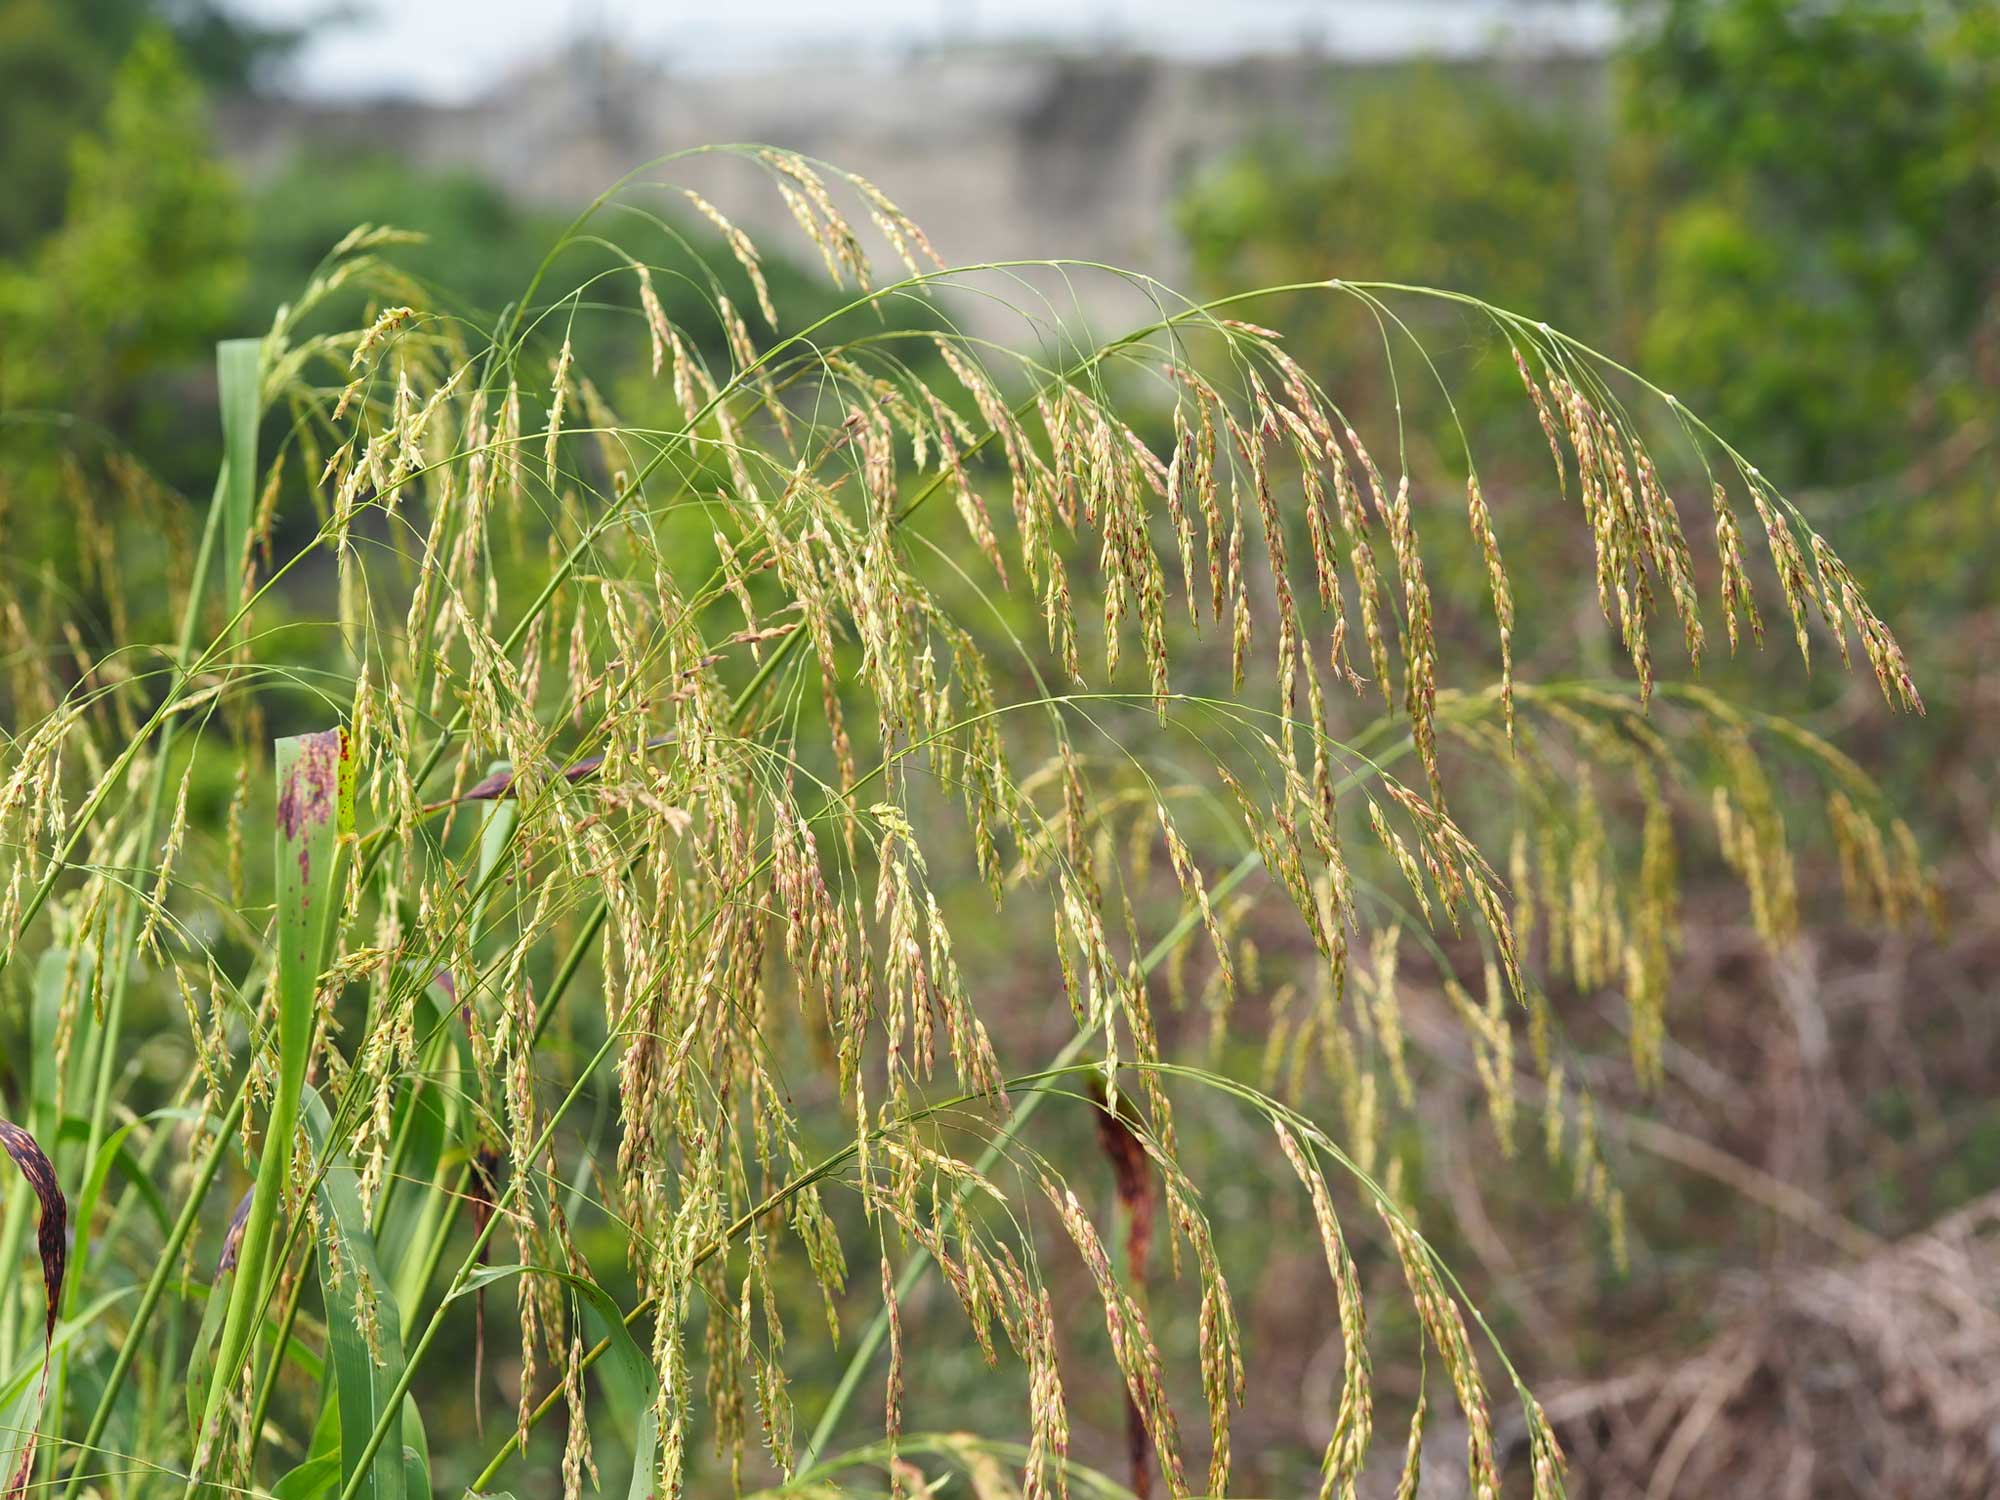 Photo of inflorescences of common wild sorghum growing in Taiwan. The inflorescences are delicate and nodding with yellowish spikelets.